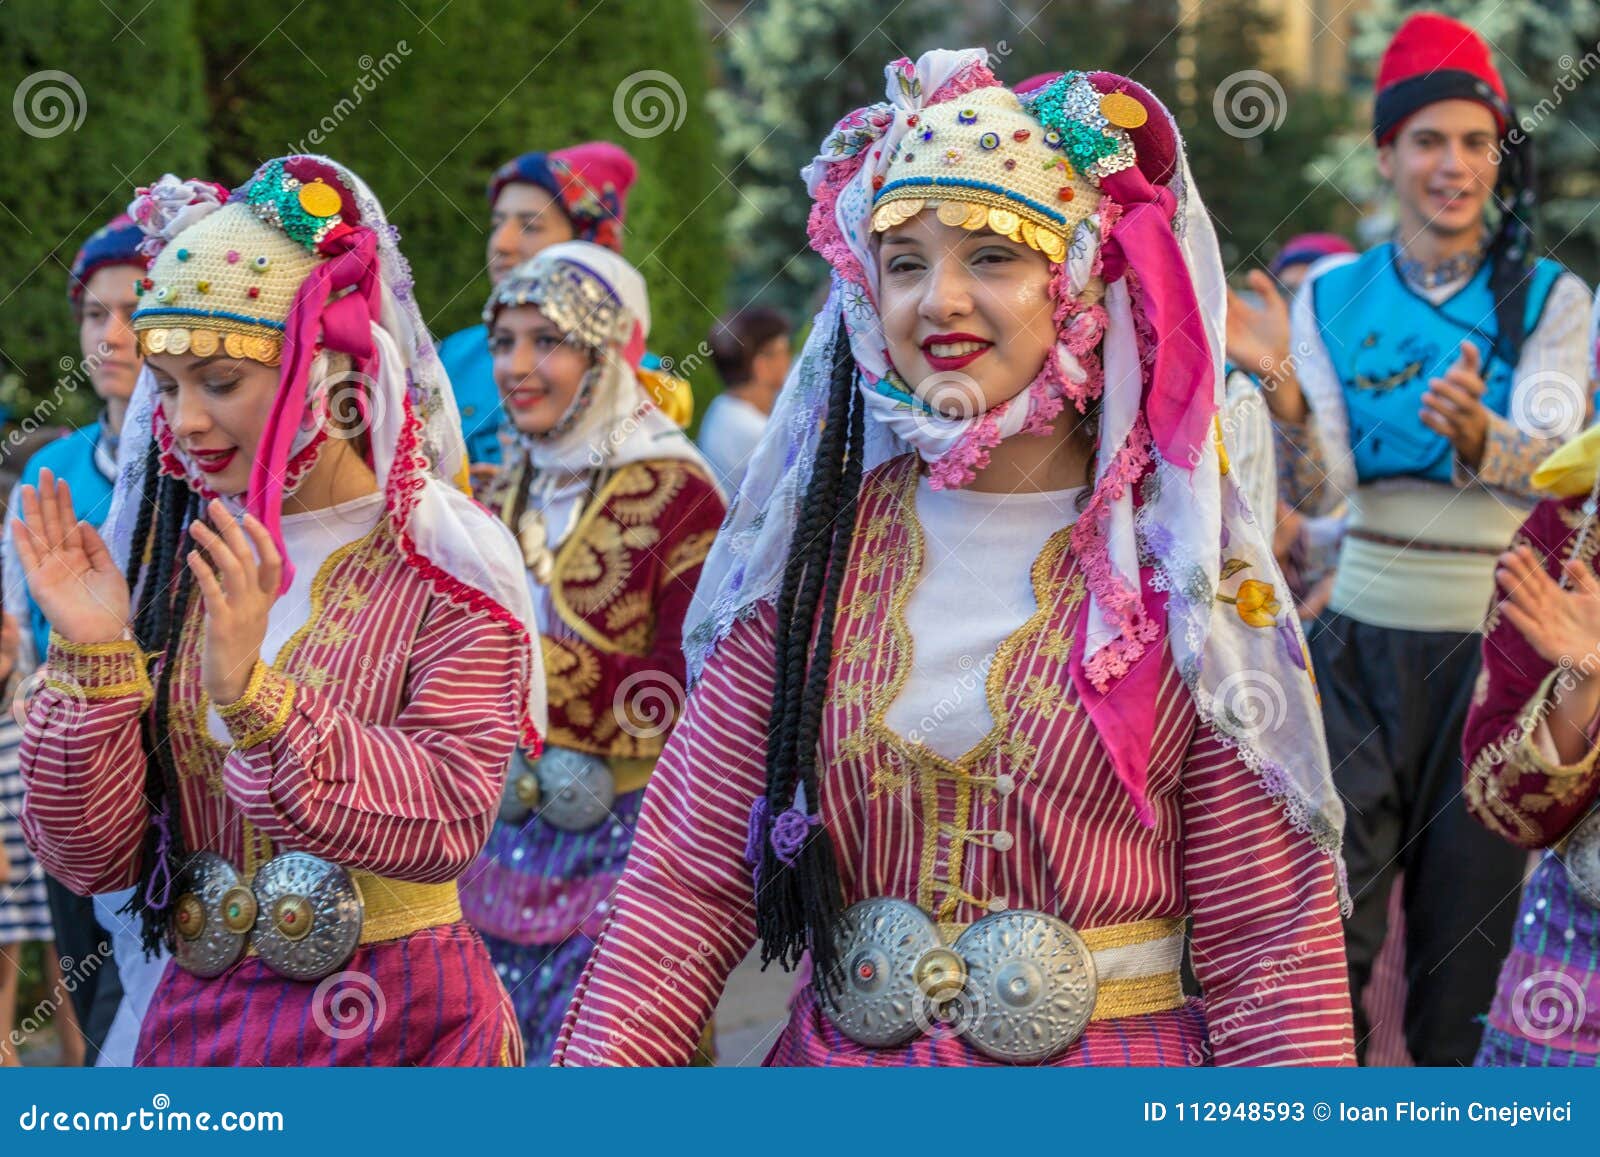 Young Dancers from Turkey in Traditional Costume Editorial Stock Photo ...